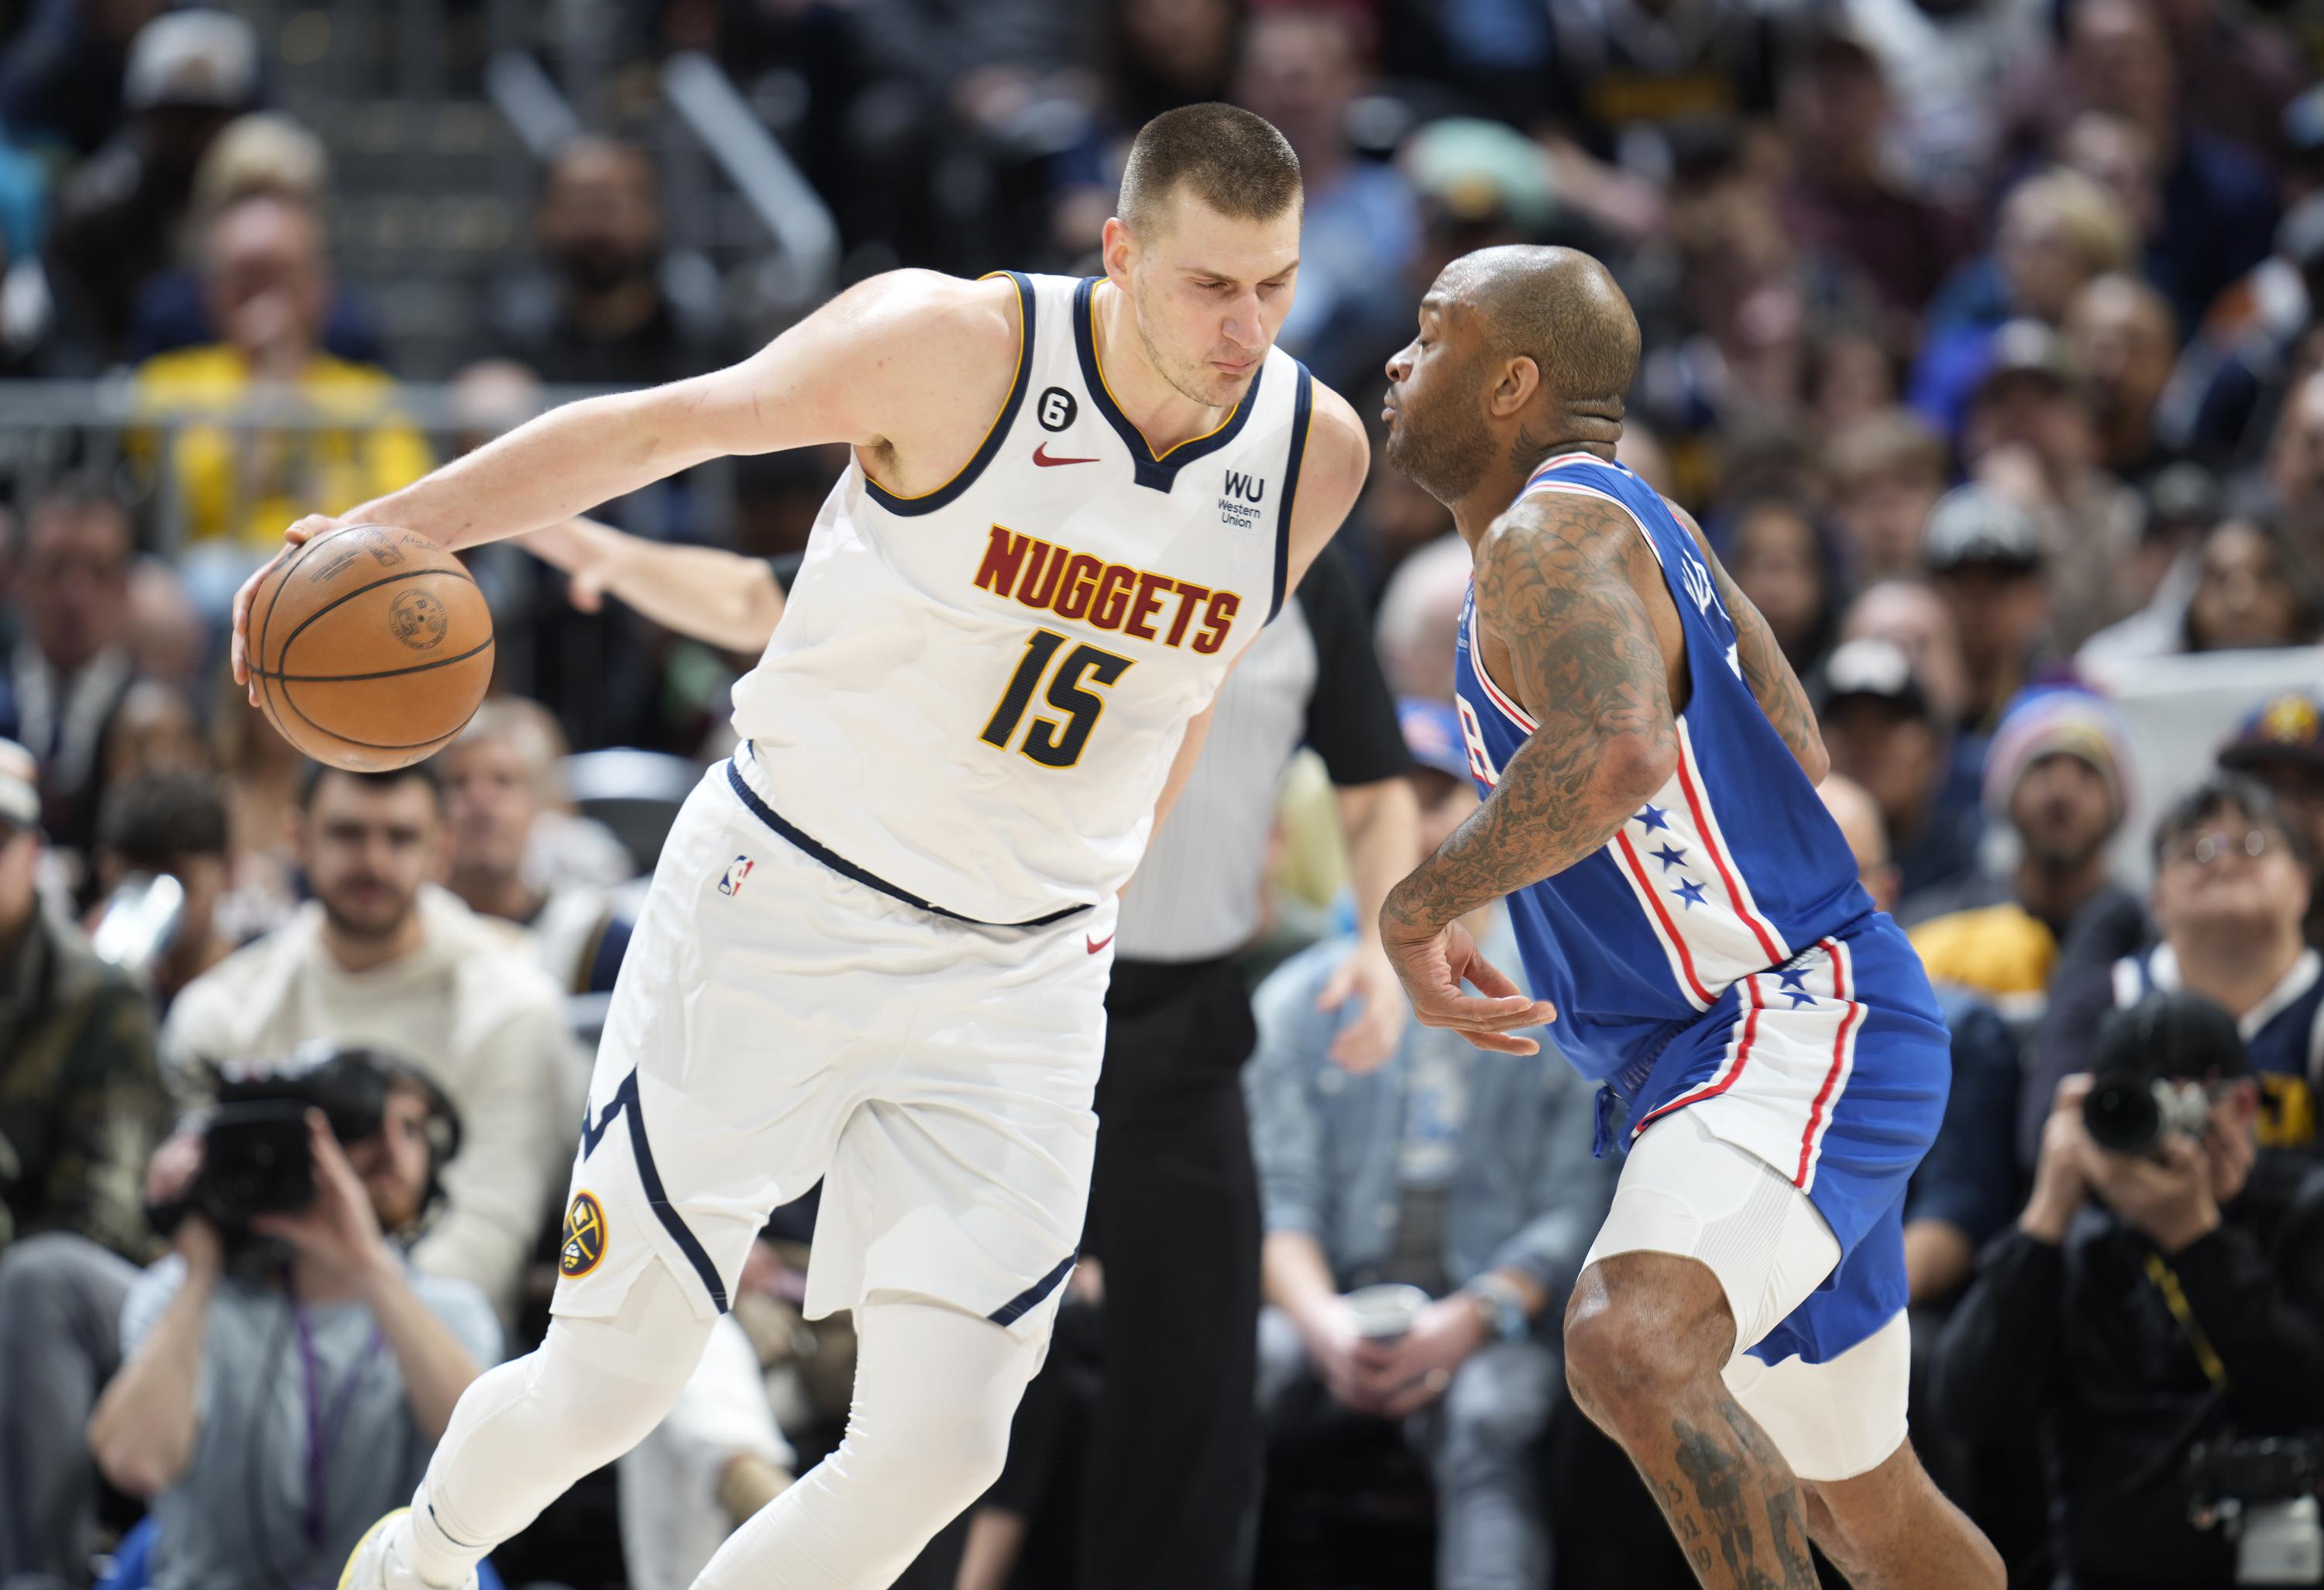 Embiid sits out, Jokic leads Nuggets past 76ers 116-111 | AP News